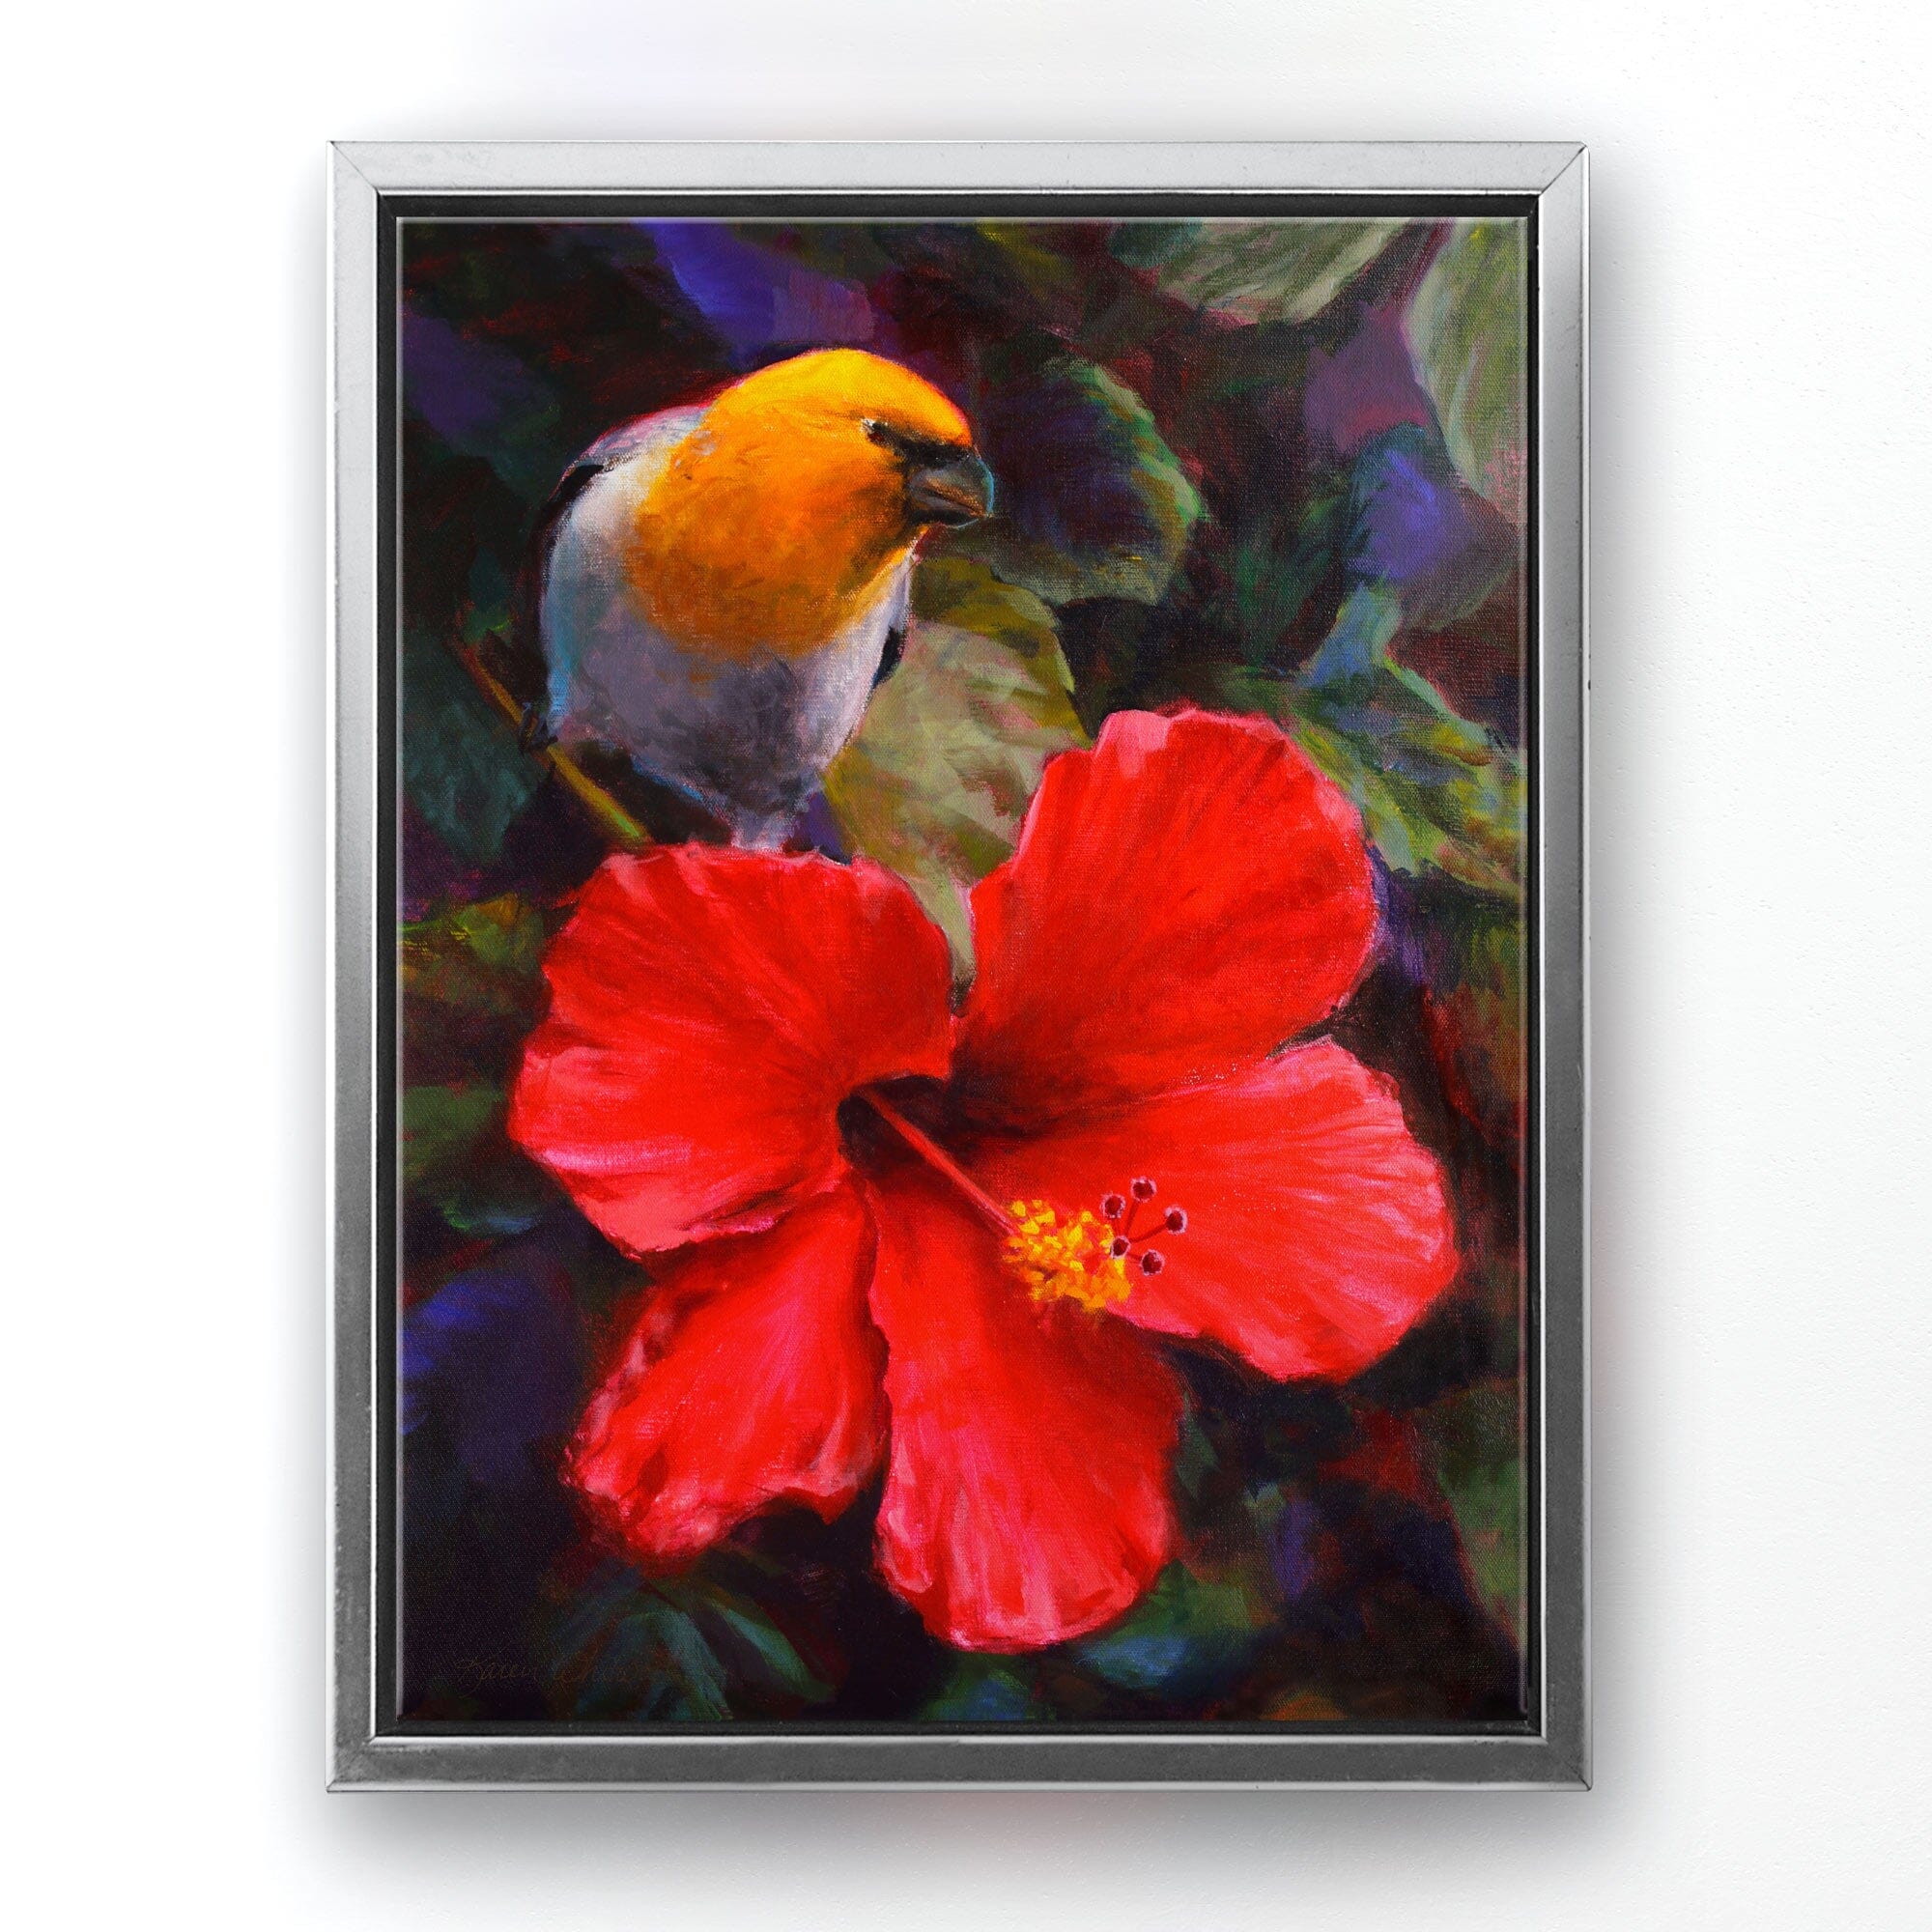 Tropical canvas art of Native Hawaiian Koki'o 'ula Hibiscus flower and and Palila bird by artist Karen Whitworth. The artwork is framed in a silver floater frame and is hanging on a white wall.